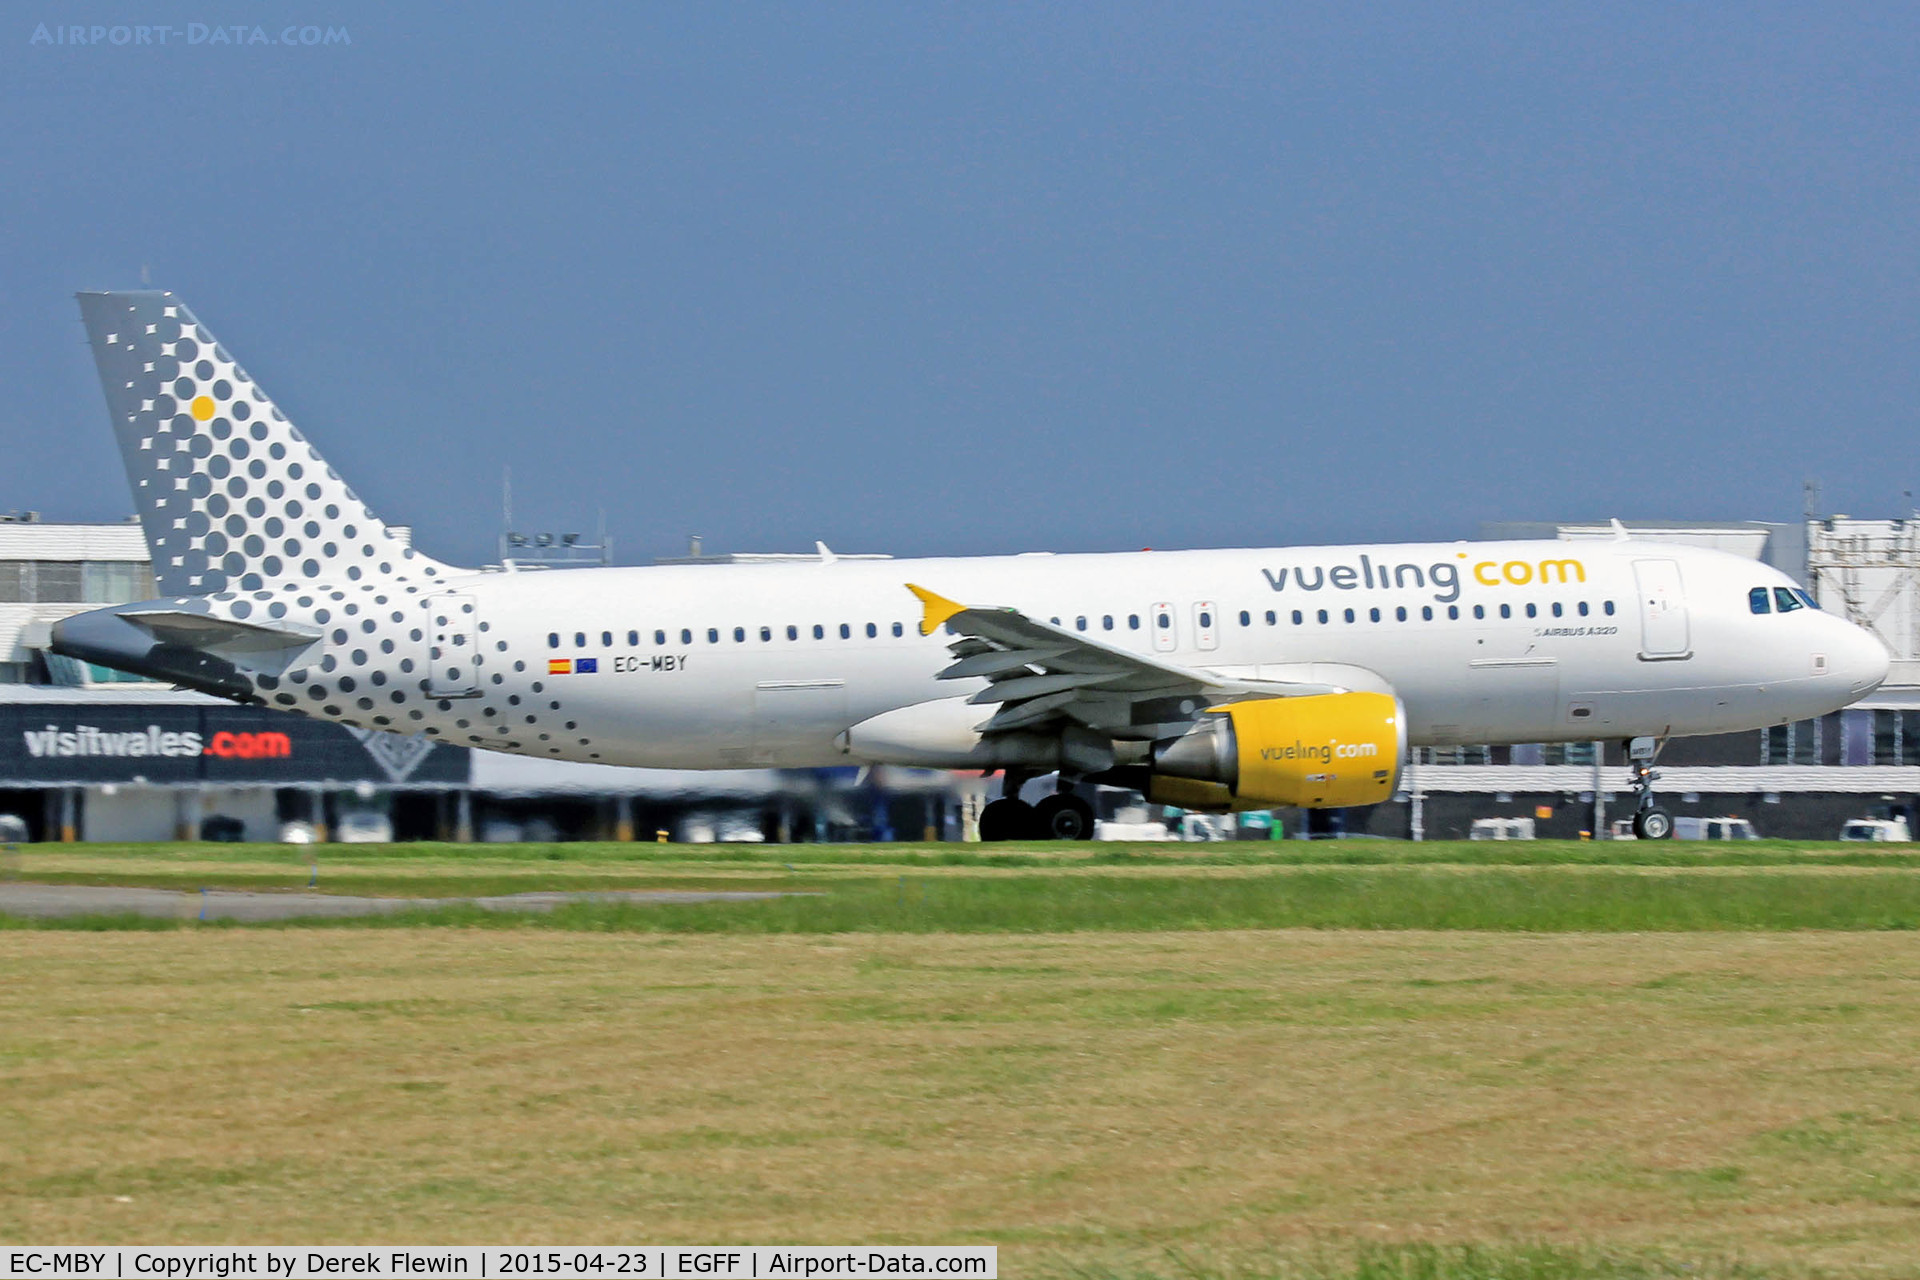 EC-MBY, 2011 Airbus A320-214 C/N 4674, A320-214, call sign Vueling 1261, previously D-AXAF, D-ABFT, departing runway 12, en-route to Malaga.